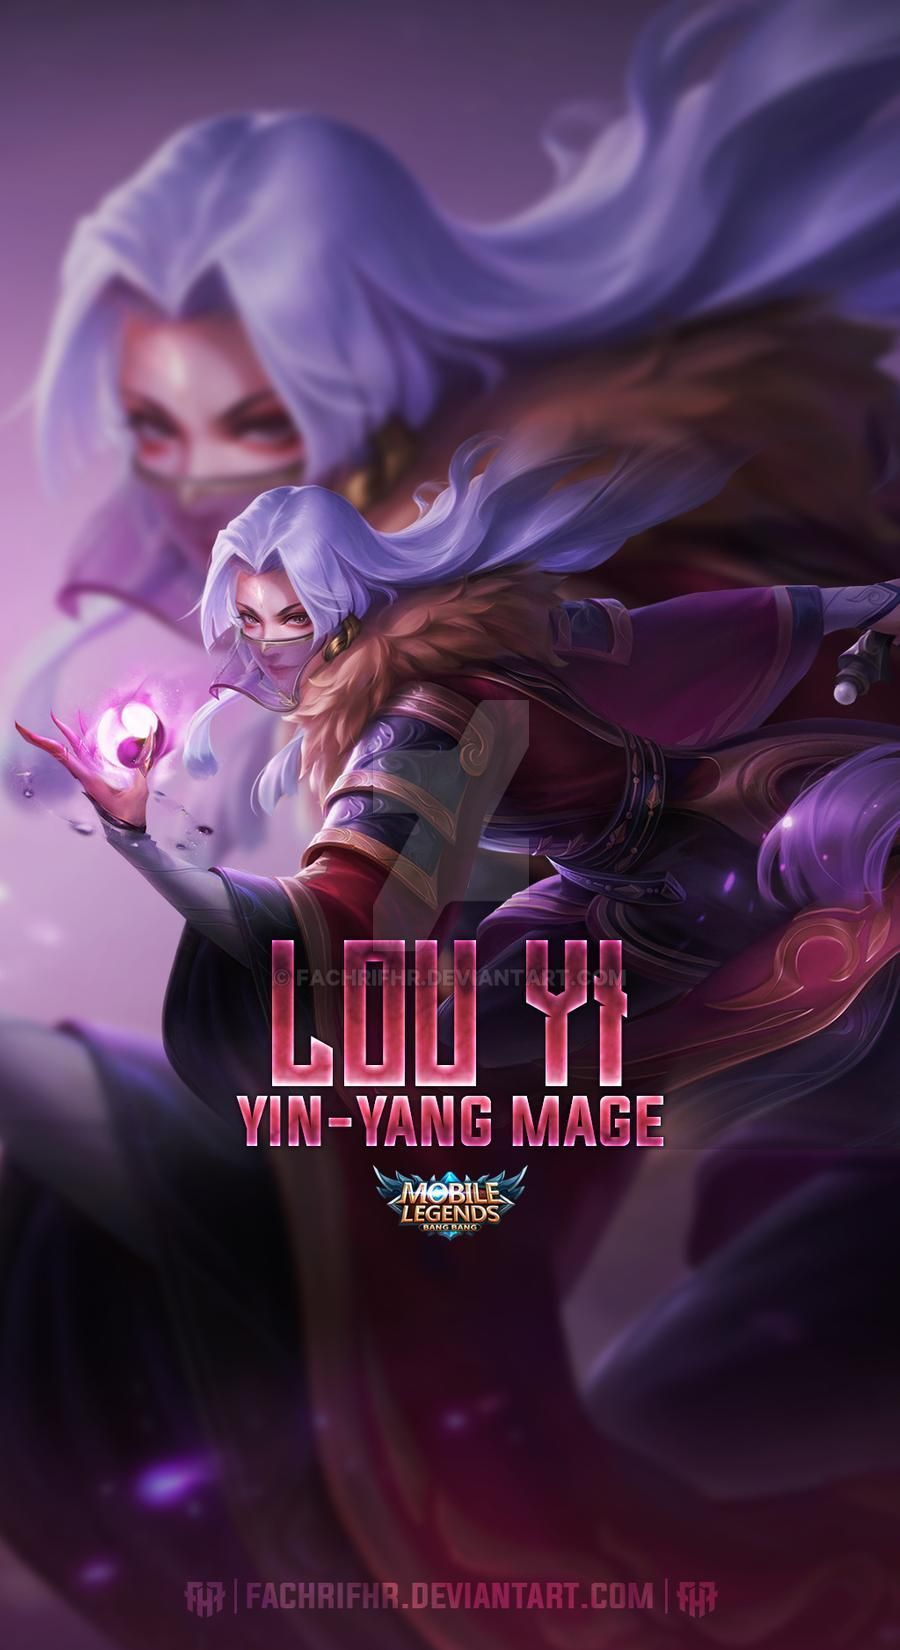 Lou Yi Yin Yang Mage. Mobile Legend Wallpaper, Mobile Legends, The Legend Of Heroes